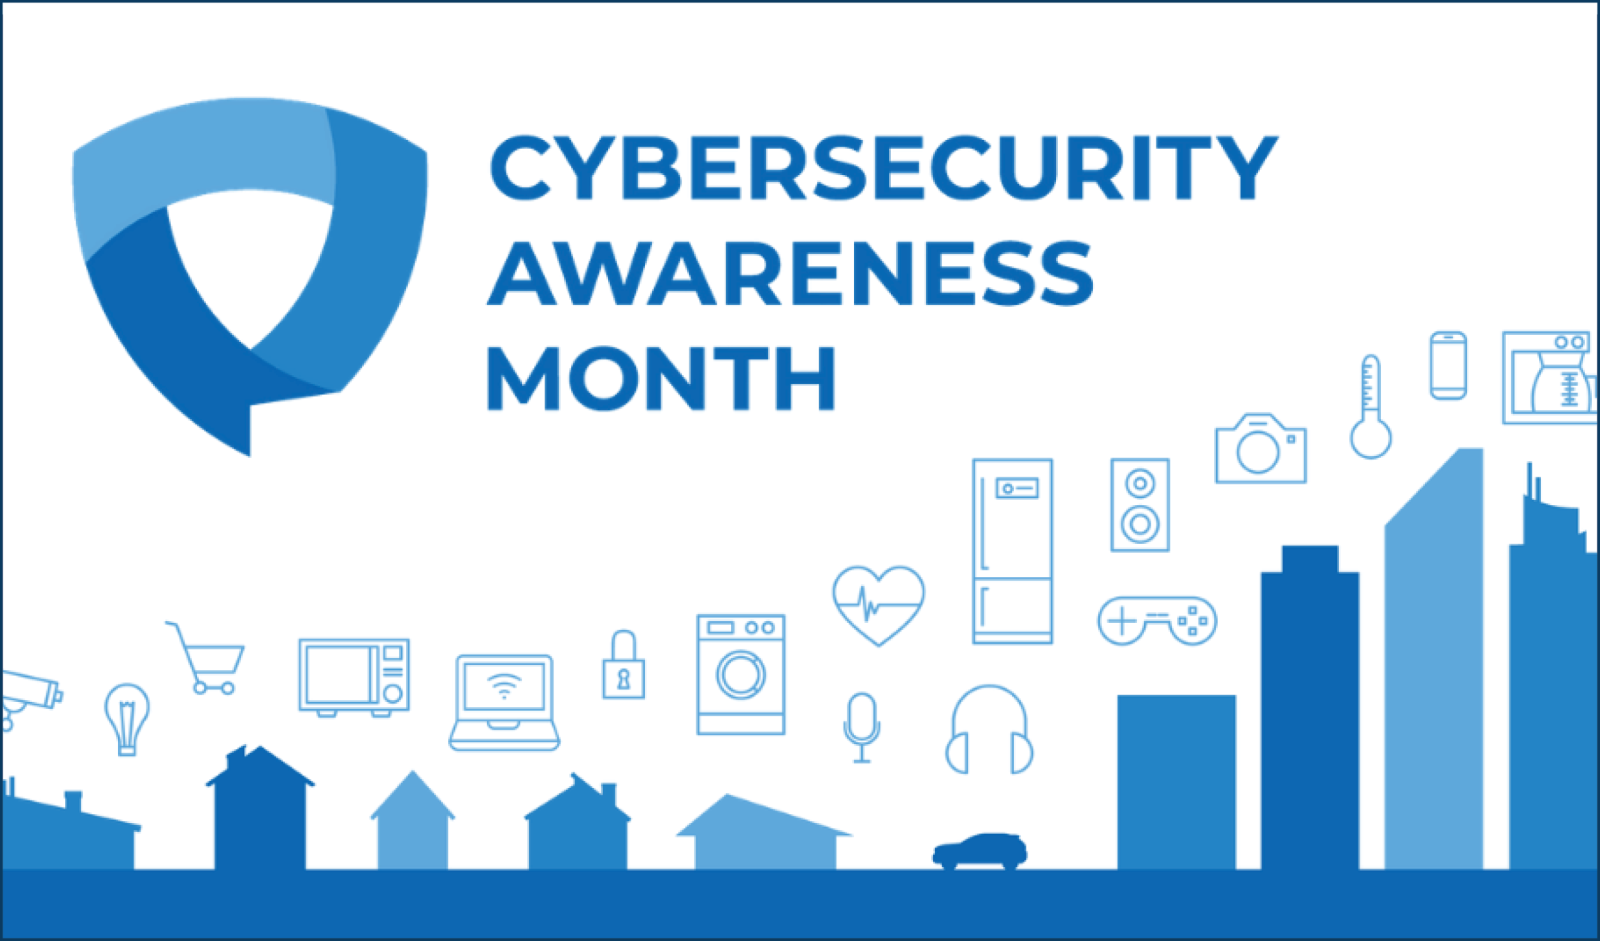 JHU Information Security Institute Cybersecurity Awareness Month